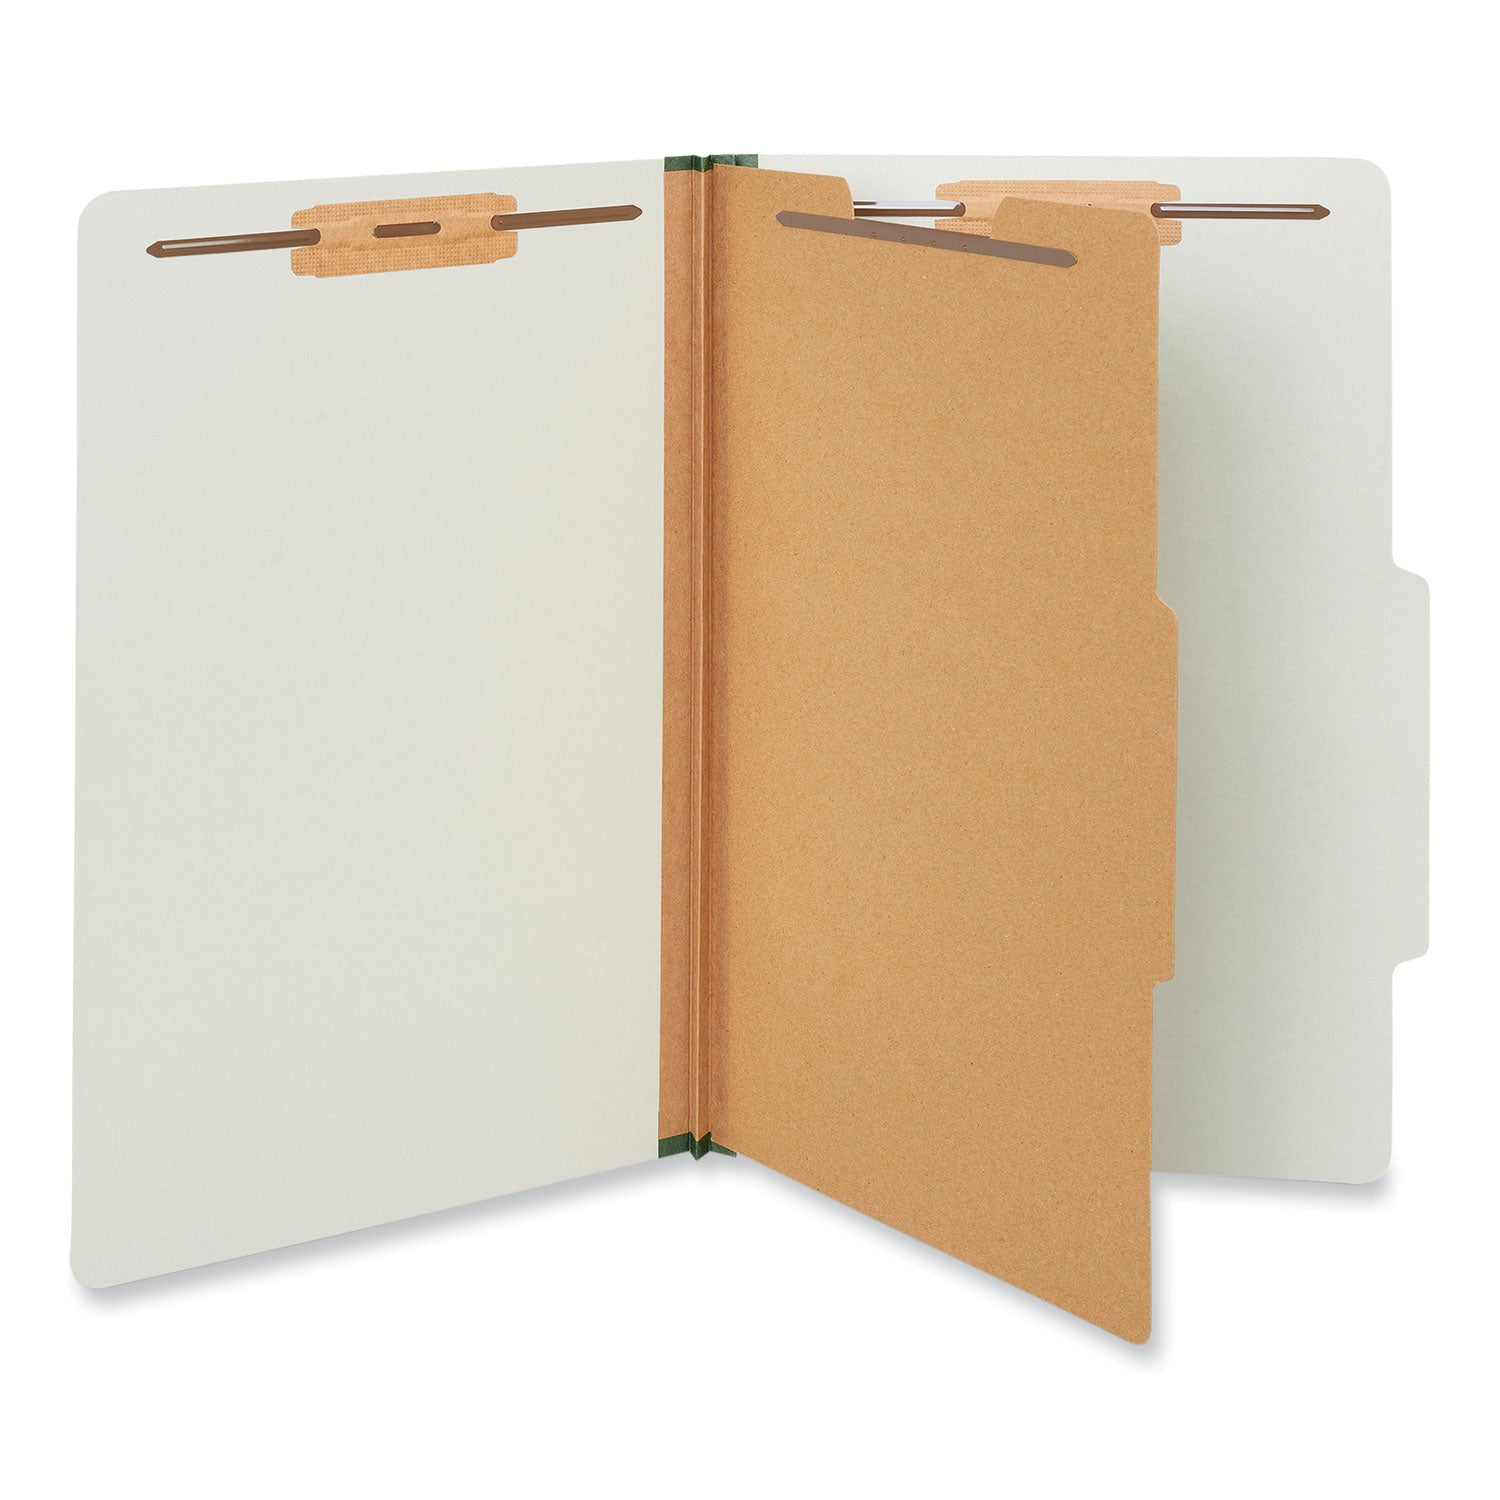 Four-Section Pressboard Classification Folders, 2" Expansion, 1 Divider, 4 Fasteners, Legal Size, Gray Exterior, 10/Box - 